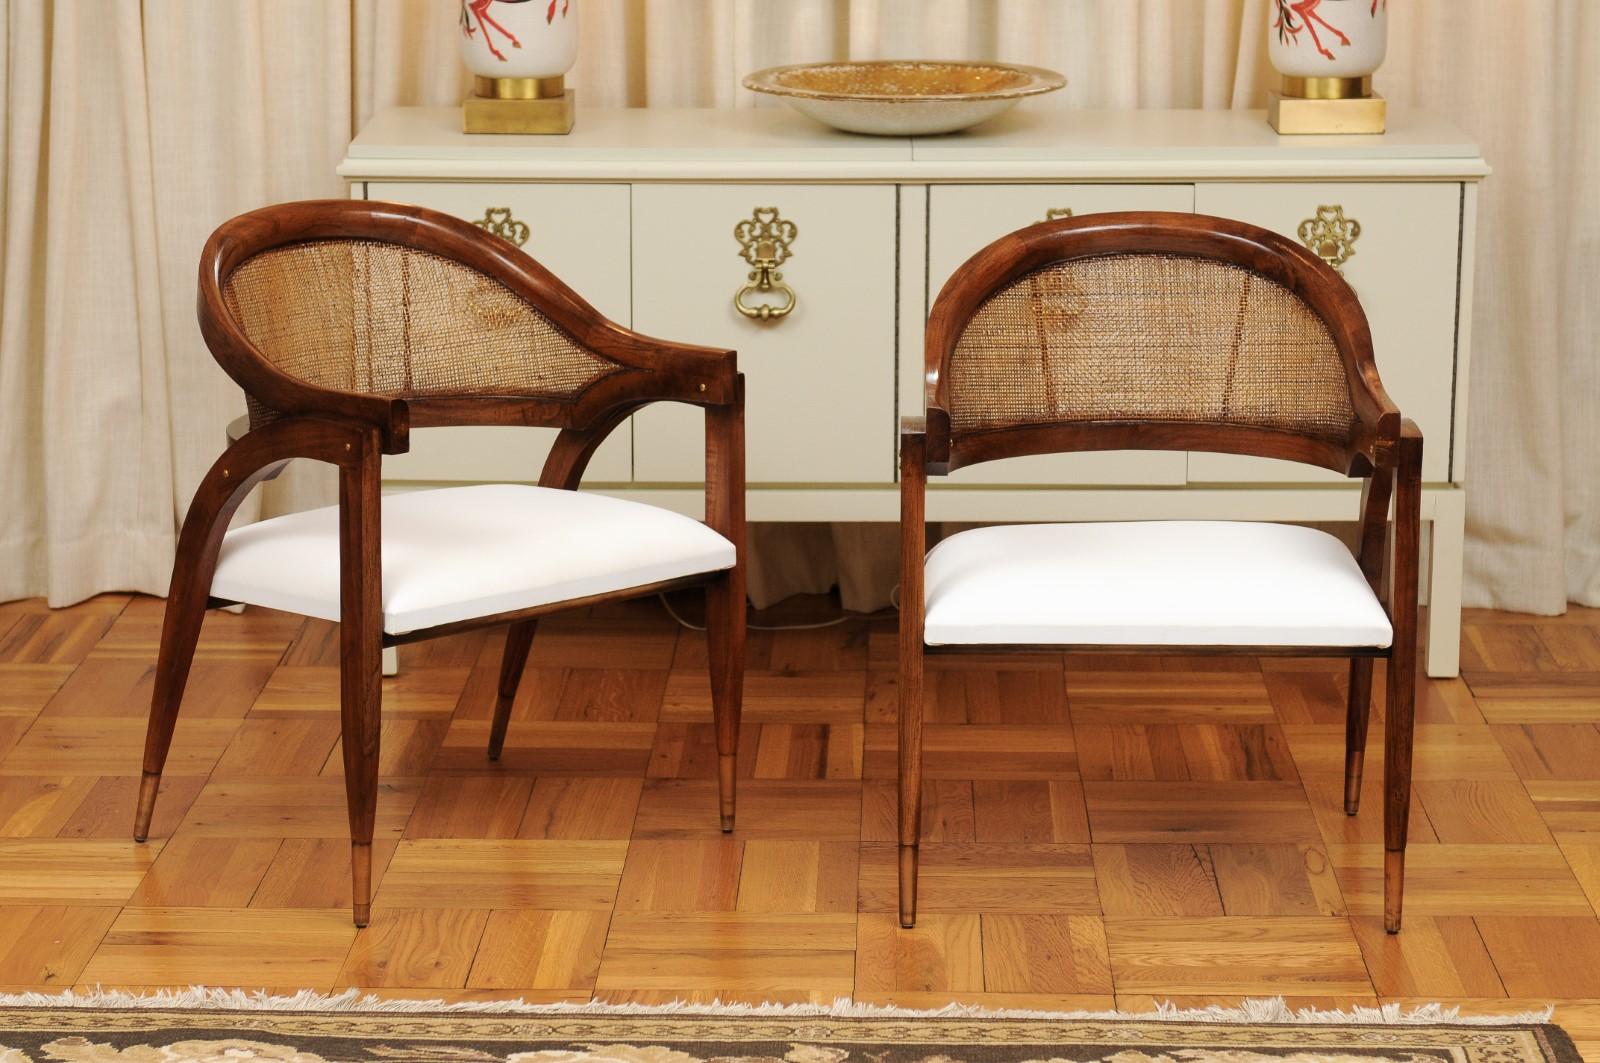 These magnificent chairs are shipped as professionally photographed and described in the listing narrative: Meticulously professionally restored and installation ready. Expert custom upholstery service is available.

A fabulous restored pair of